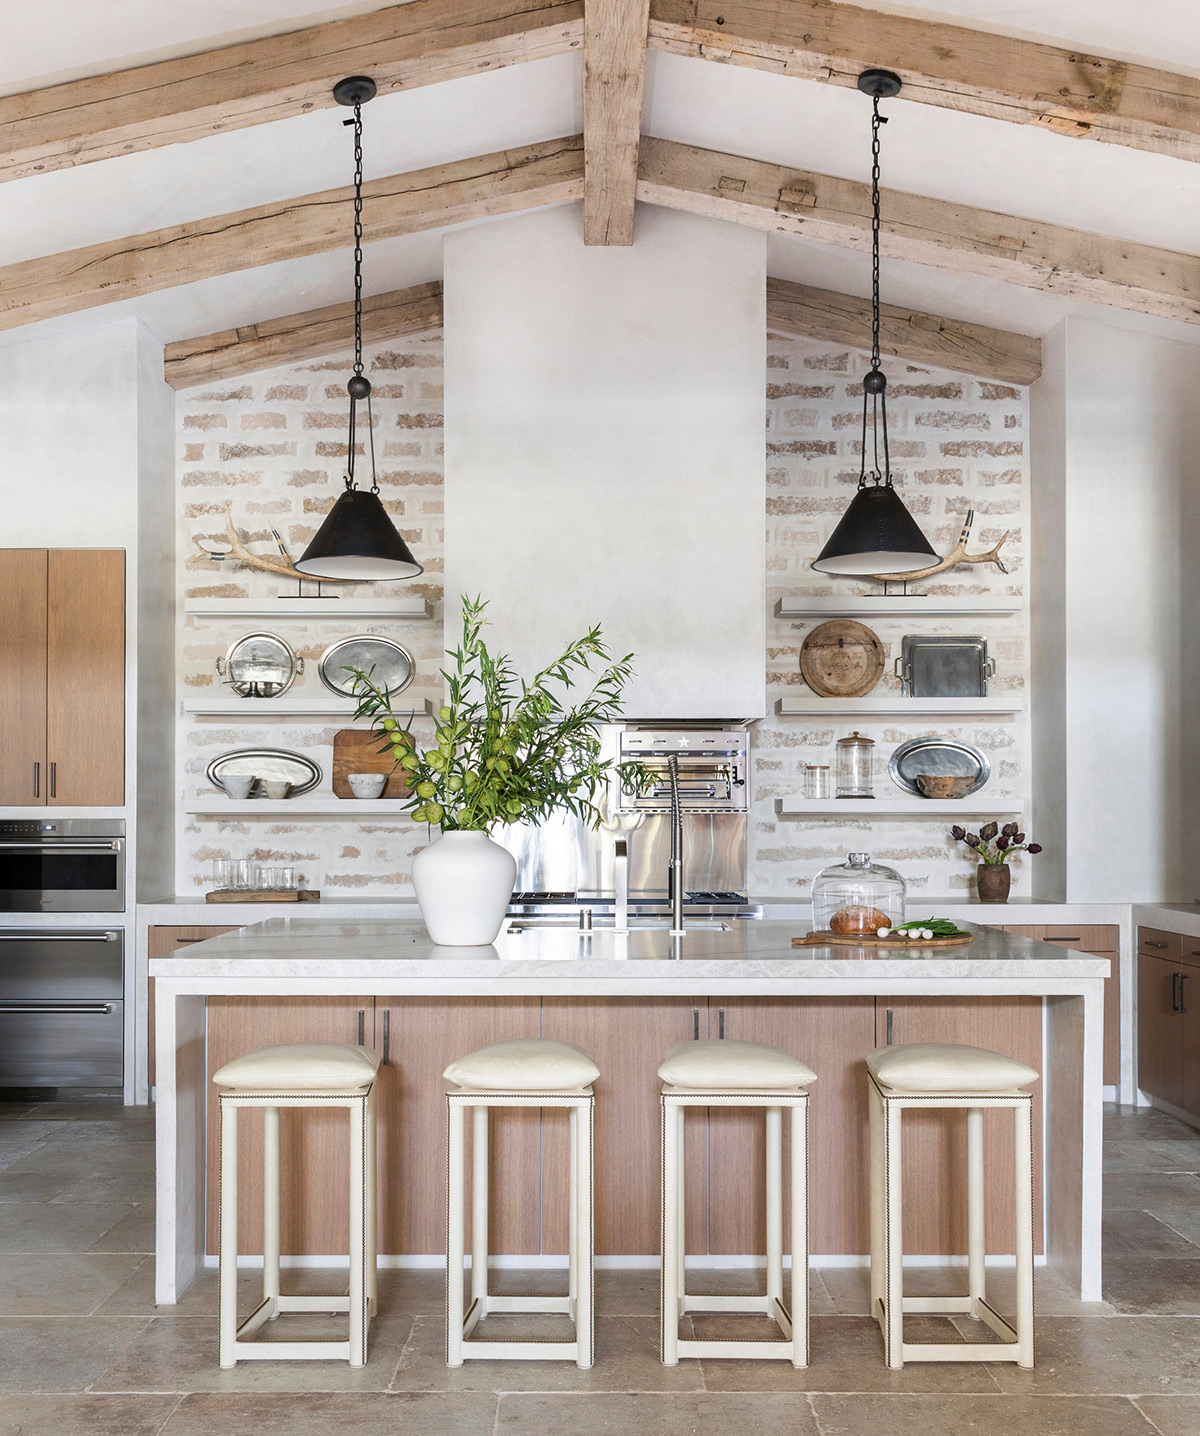 40 rustic kitchen ideas with tips to help you design yours